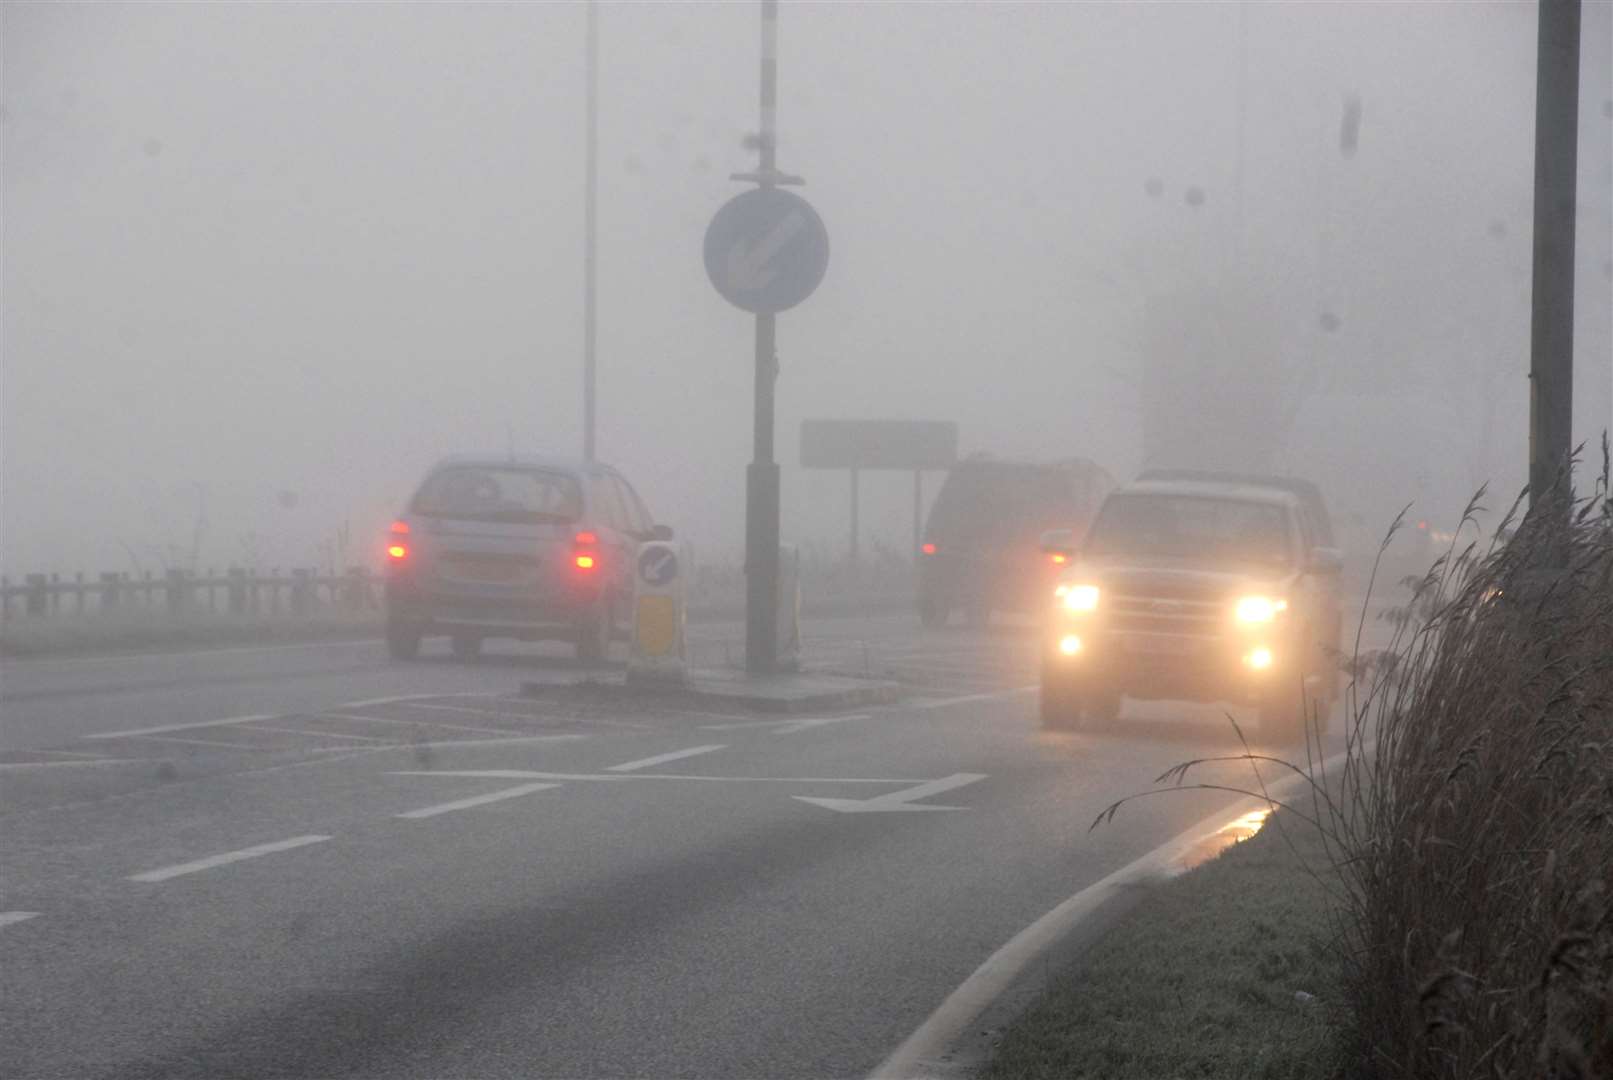 The Met Office is forecasting freezing fog for parts of England this weekend